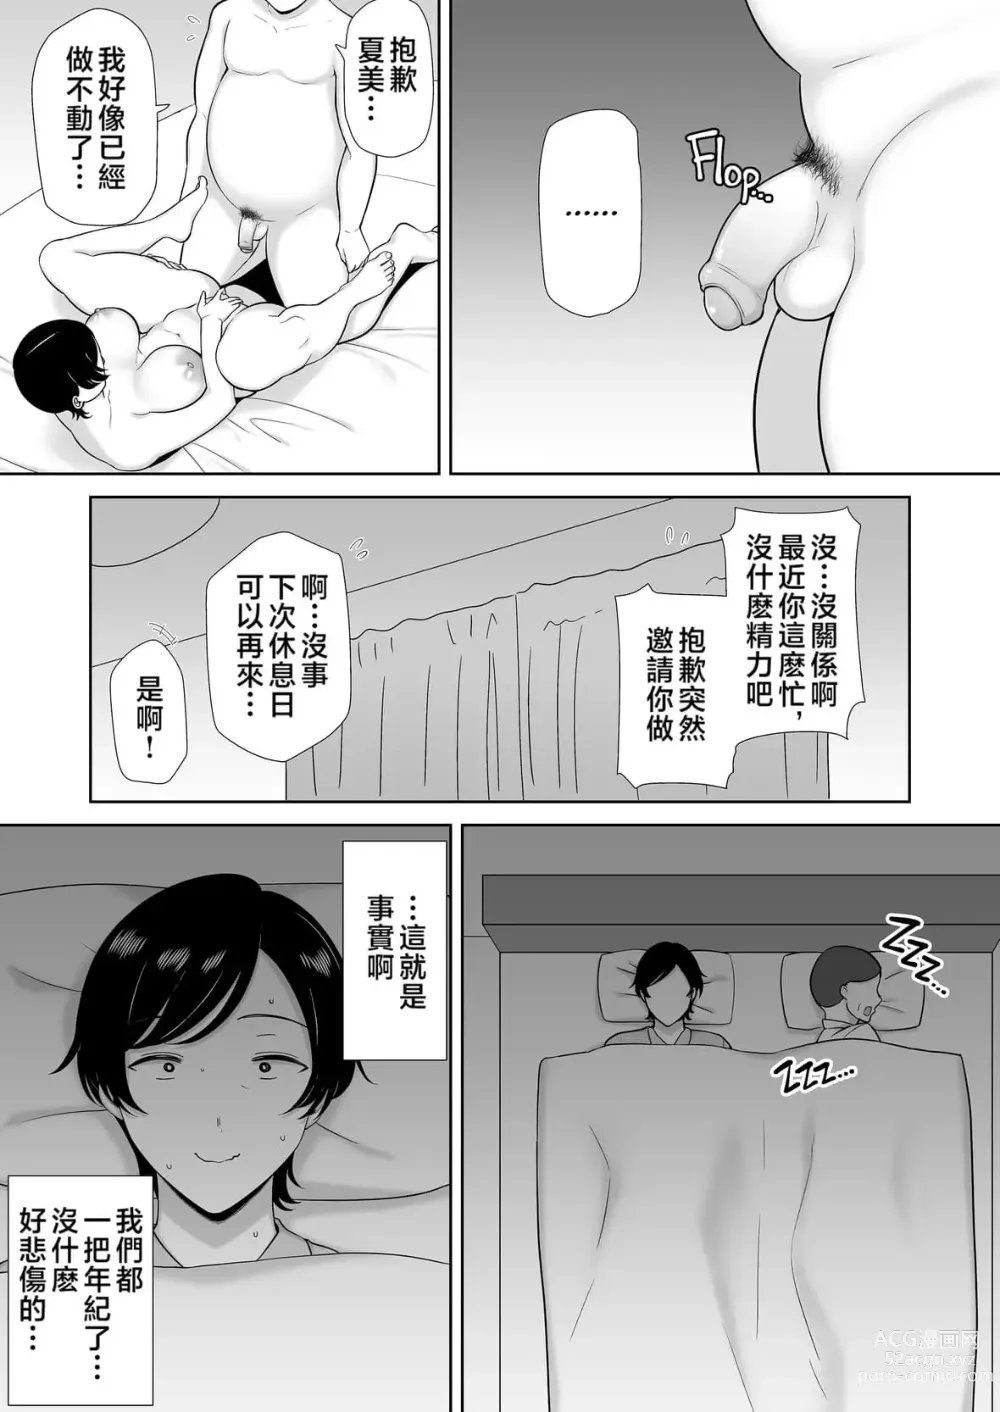 Page 12 of doujinshi even mom want a litle lovin